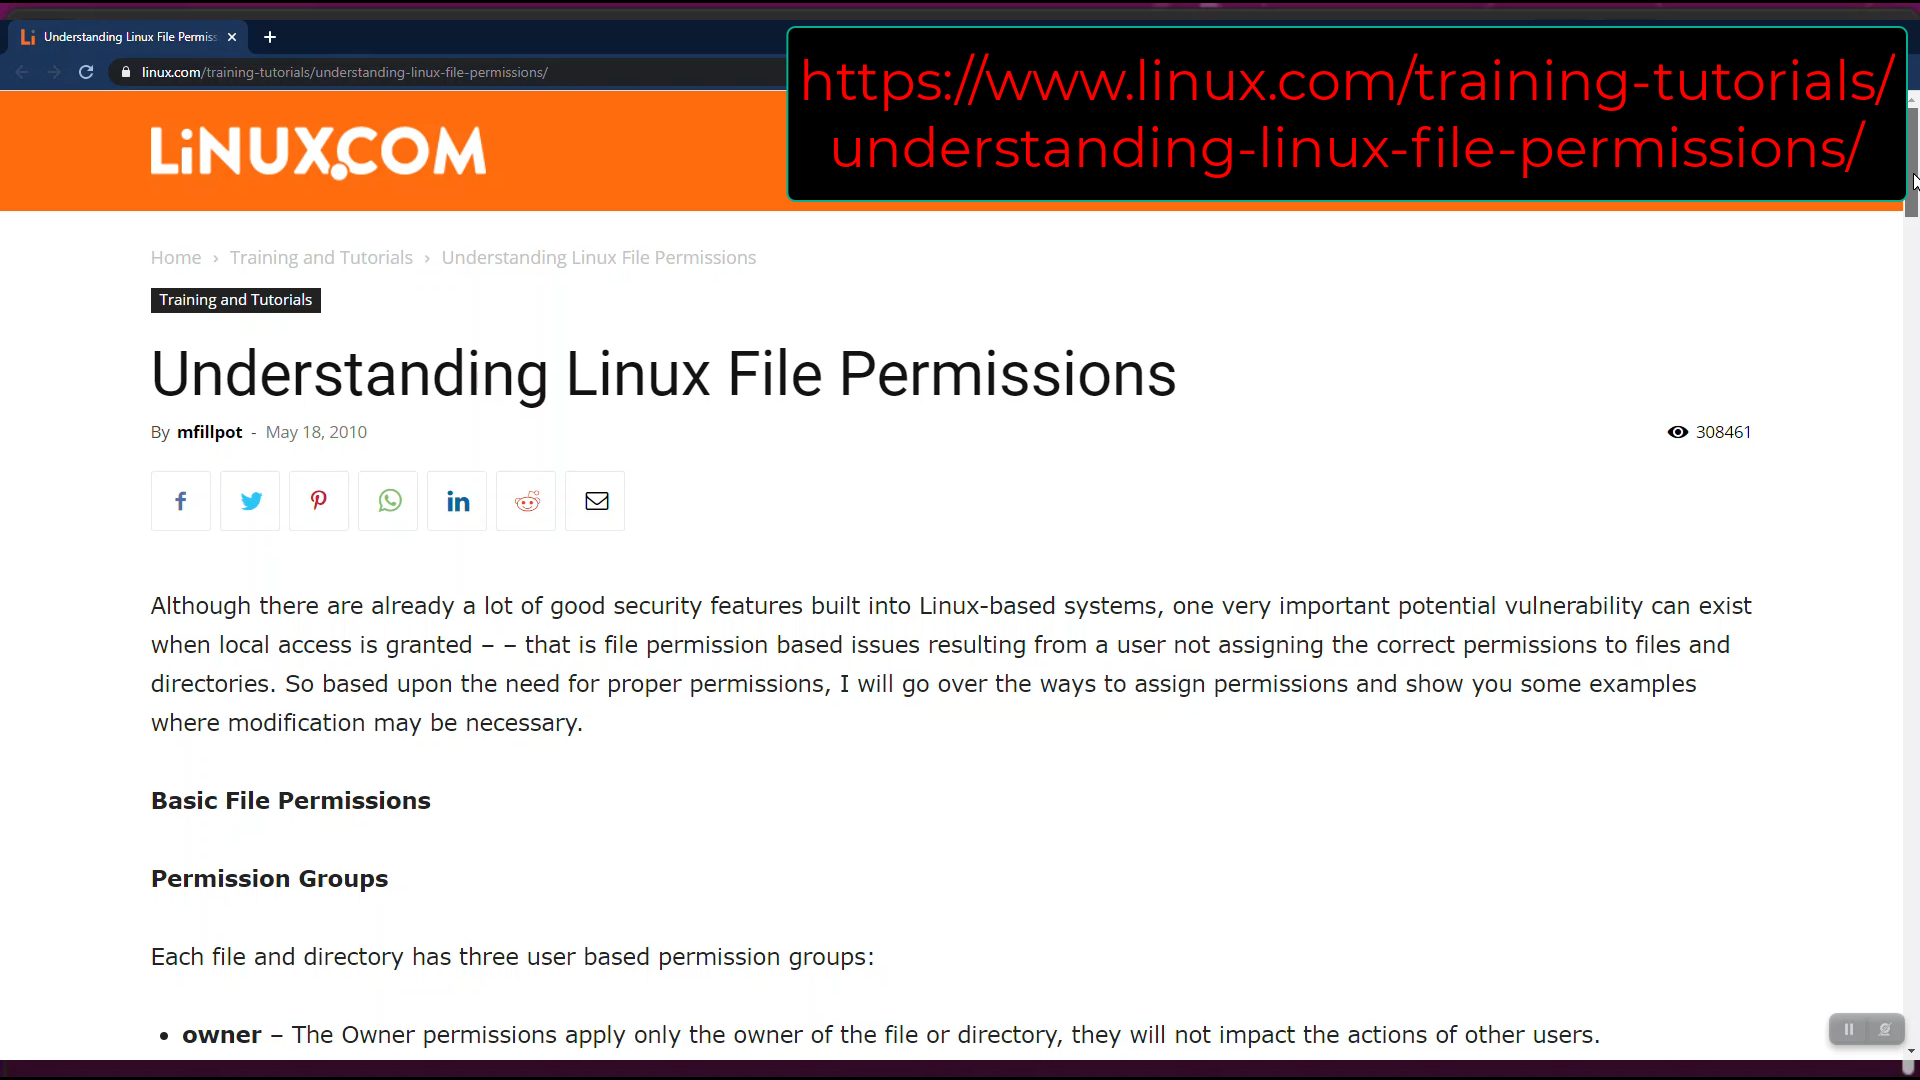 Screenshot of Understanding Linux File Permissions article